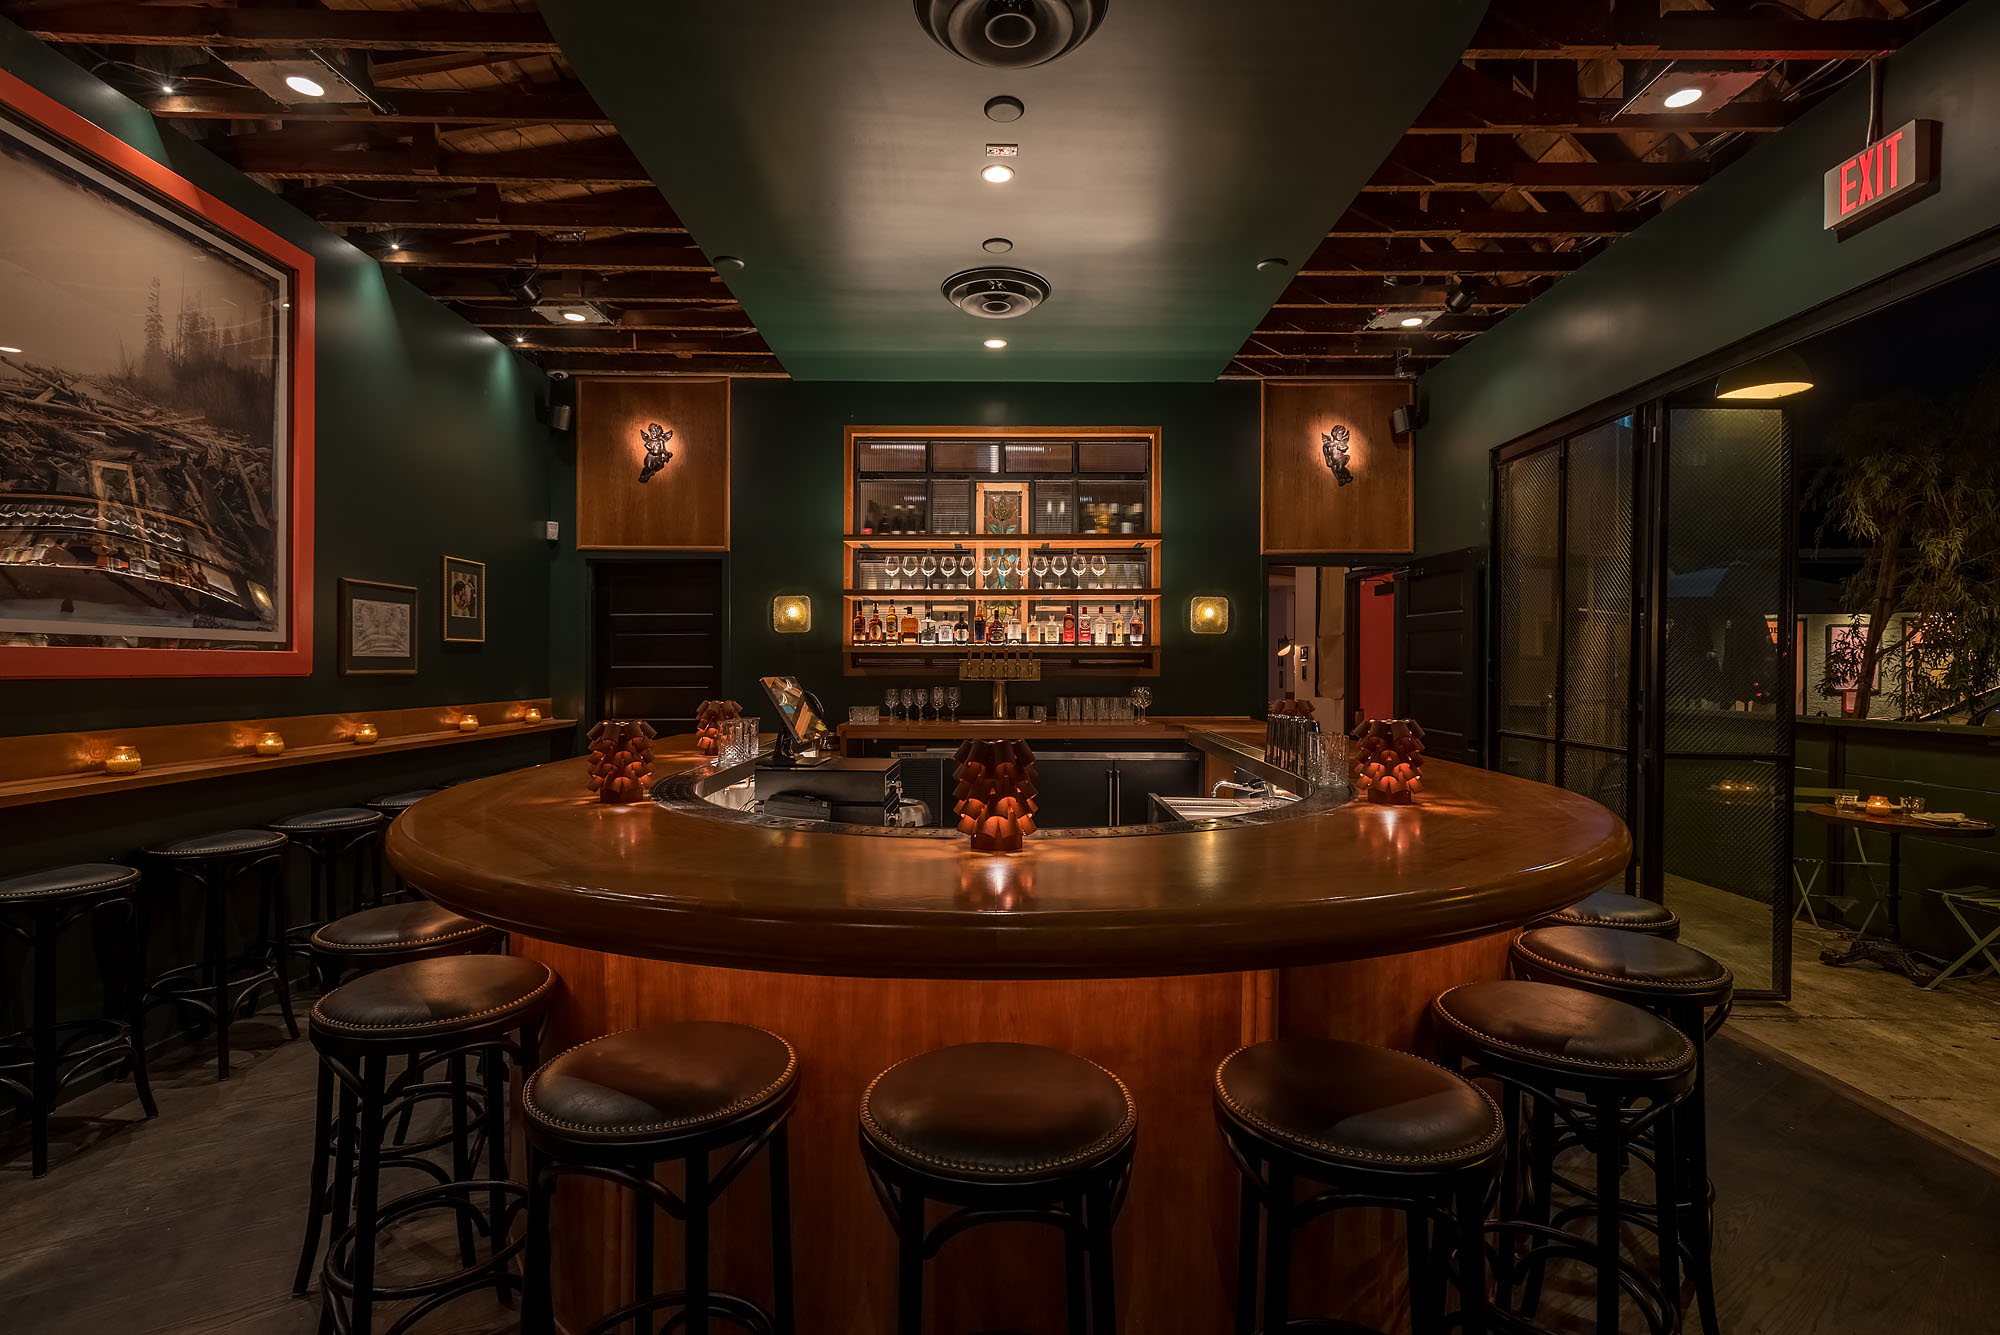 A rounded bar looks out over dark green walls and a glowing back bar.